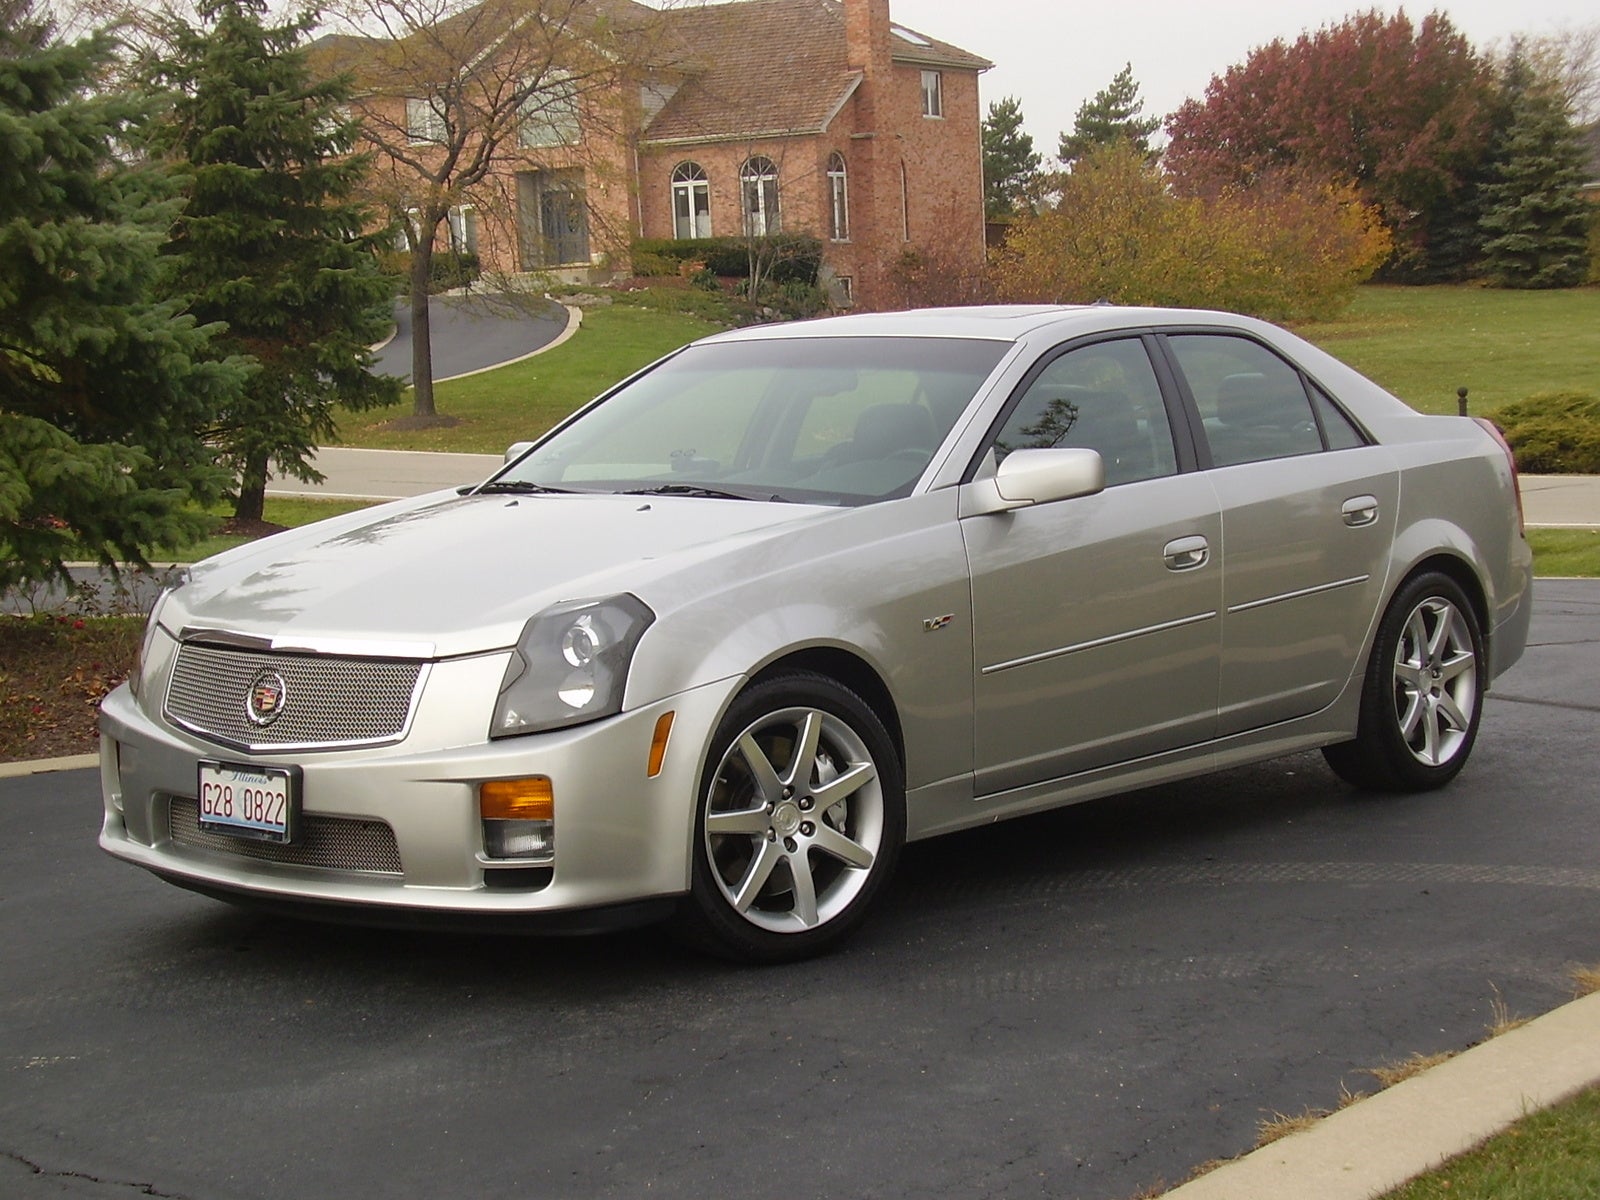 Cadillac  2008 on 2004 Cadillac Cts V   Pictures   2004 Cadillac Cts V Picture